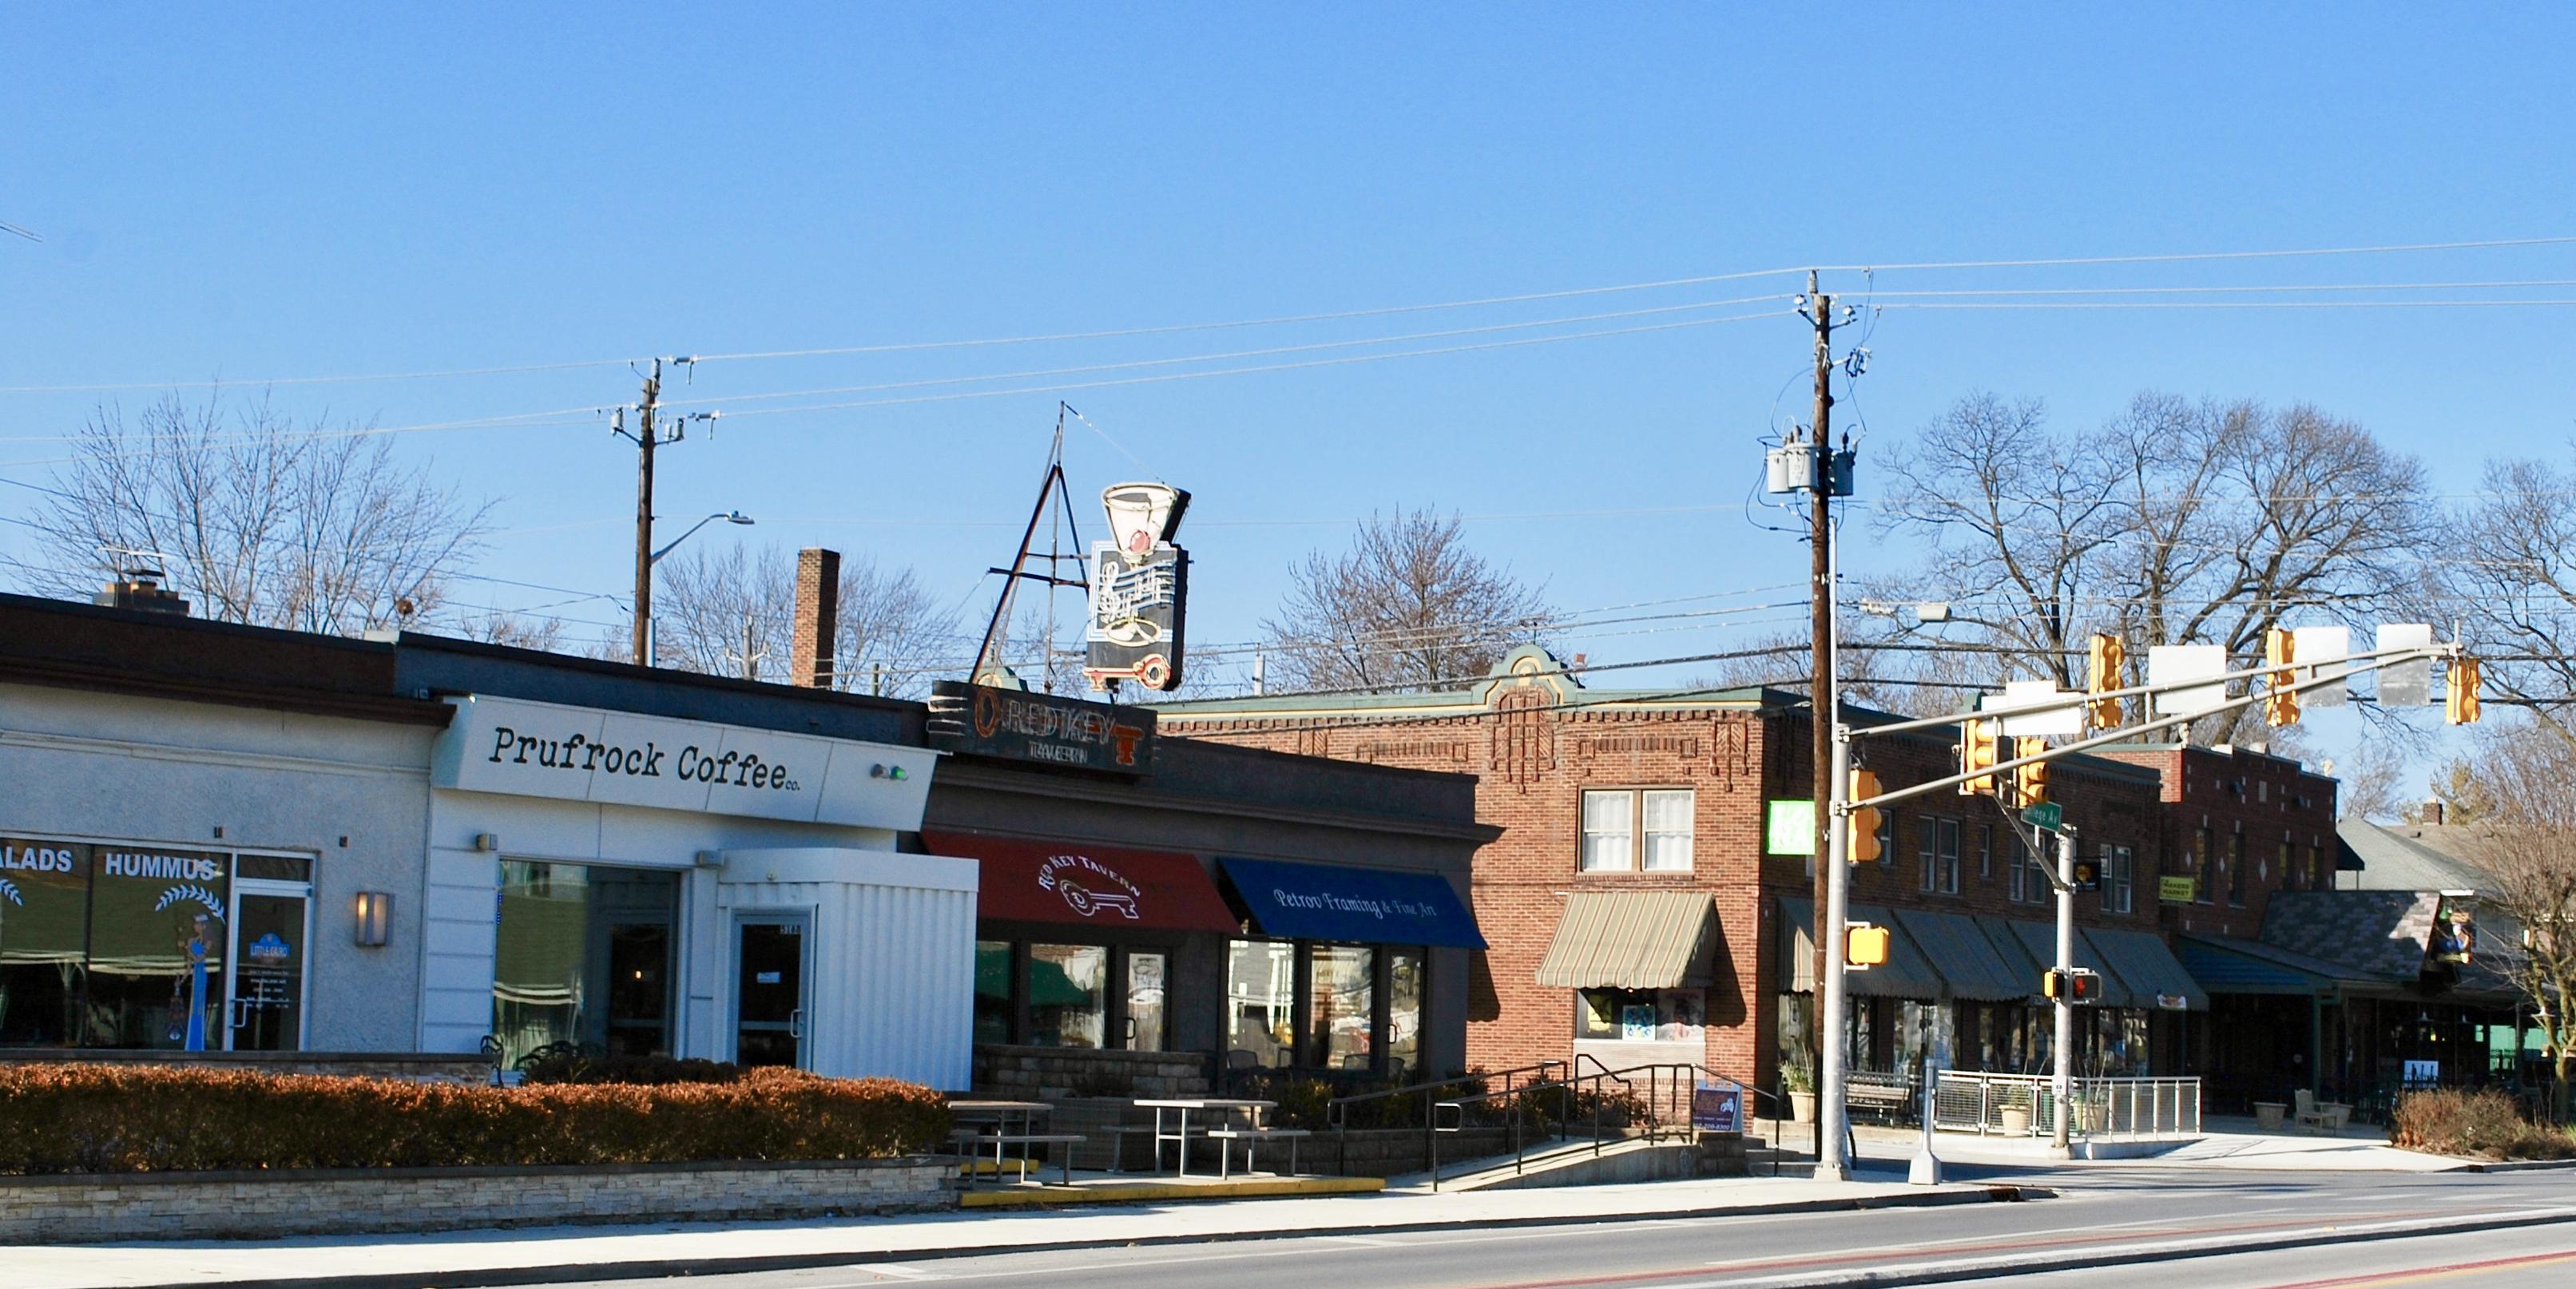 A row of connected businesses including a coffee shop, tavern, and framing store. 